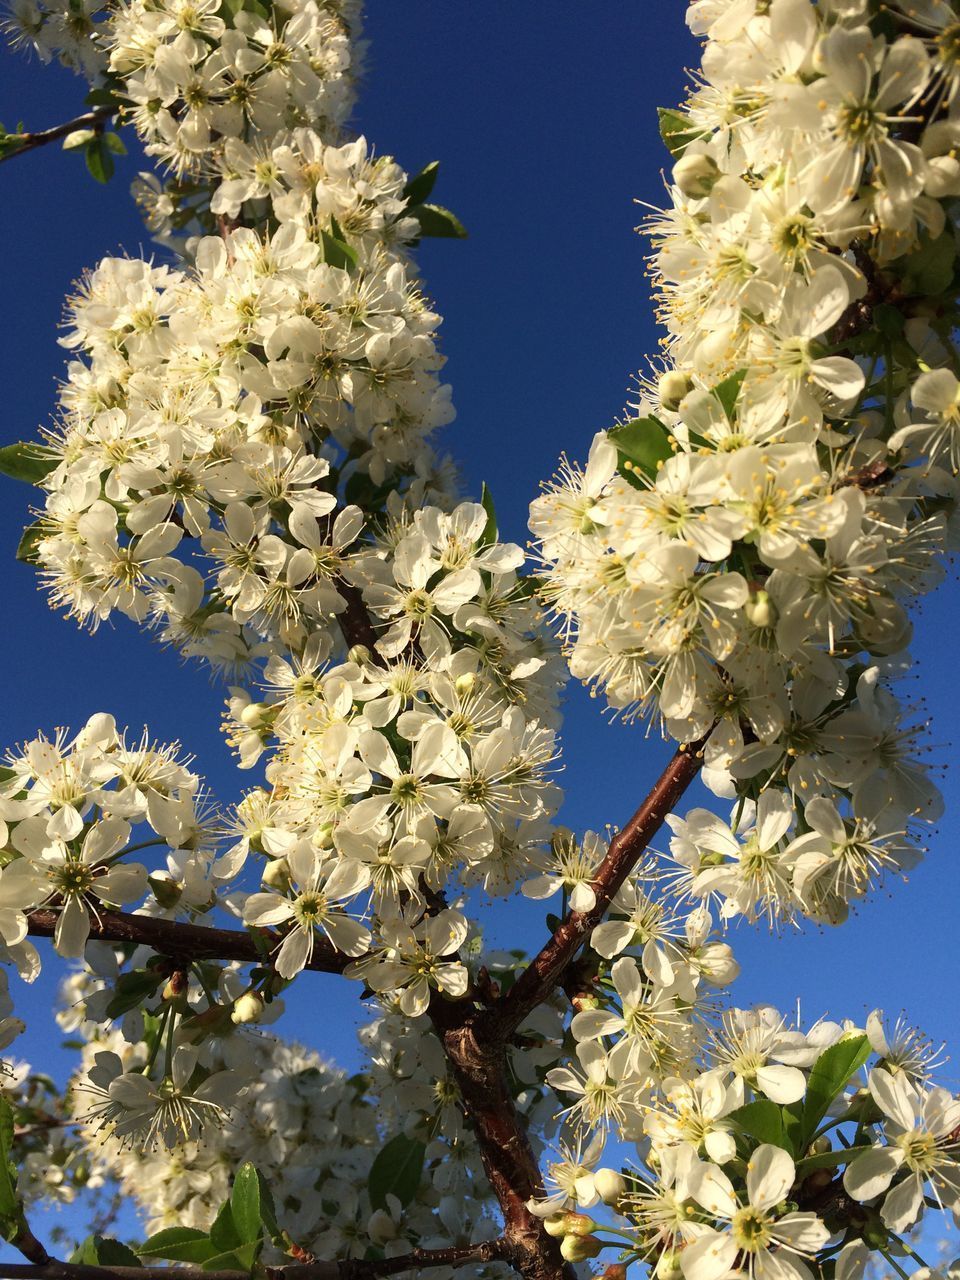 LOW ANGLE VIEW OF CHERRY BLOSSOM AGAINST CLEAR BLUE SKY